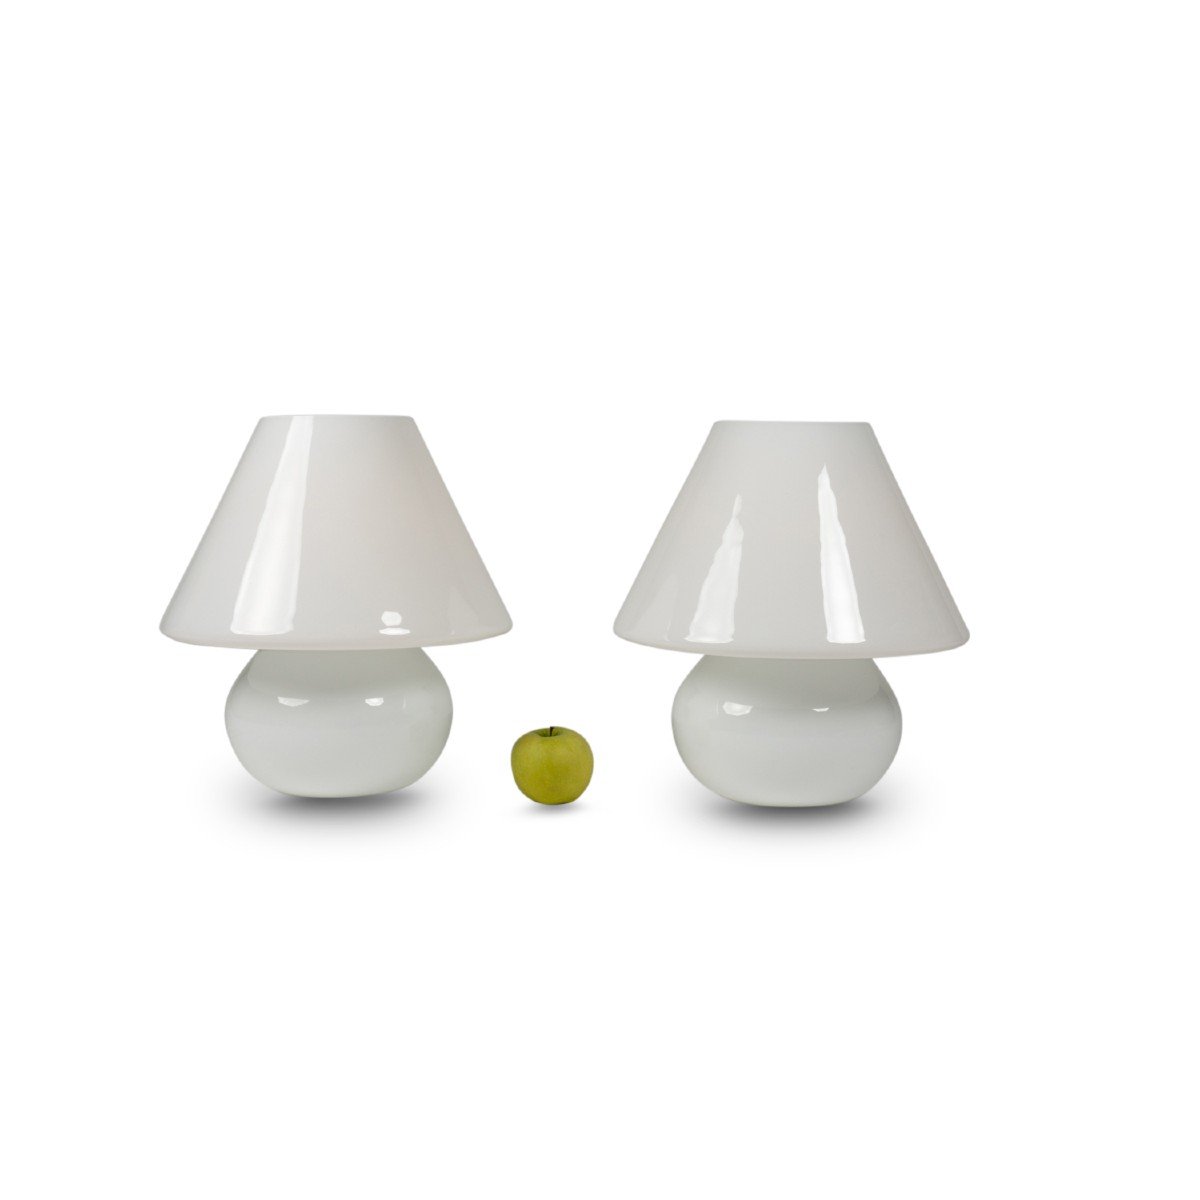 Pair Of White Opaline Lamps, 1990s, Ls5788256b